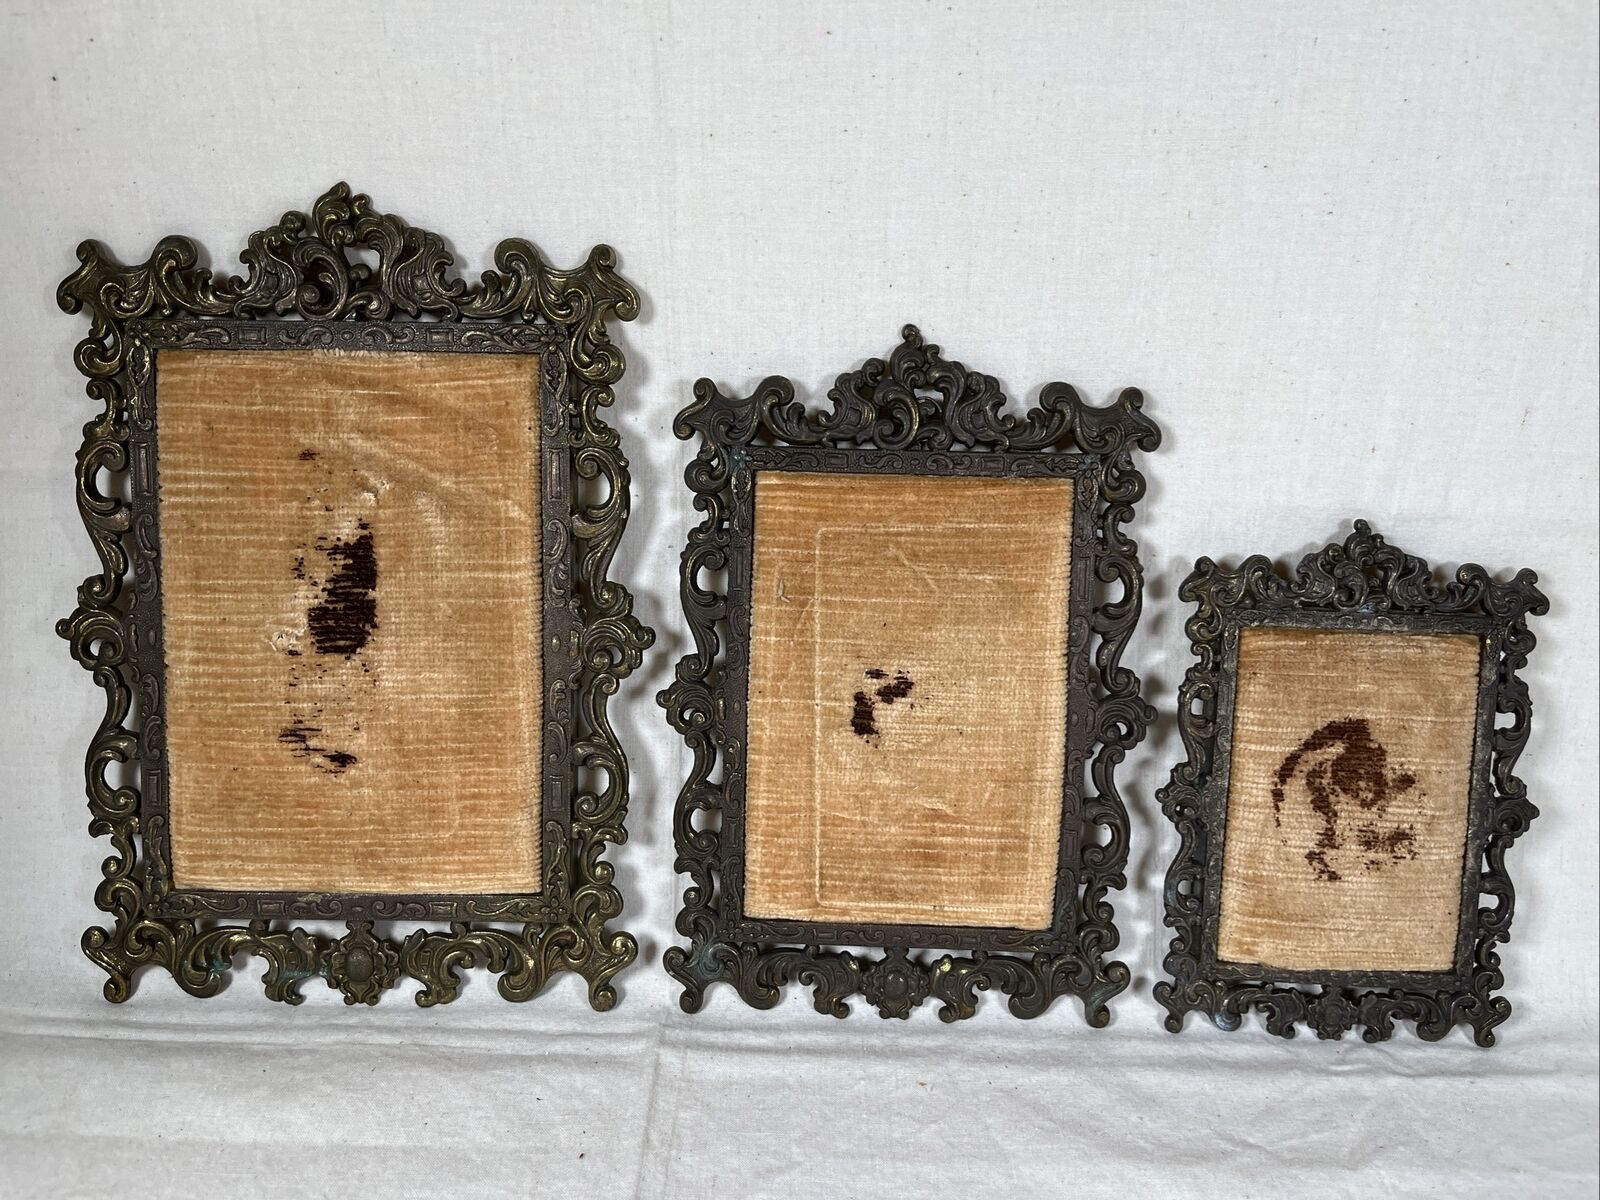 Vintage Depose Italy Ornate Brass Picture Frames 2.5”x3.5”, 3.5”x4.75”, 4”x5.75”